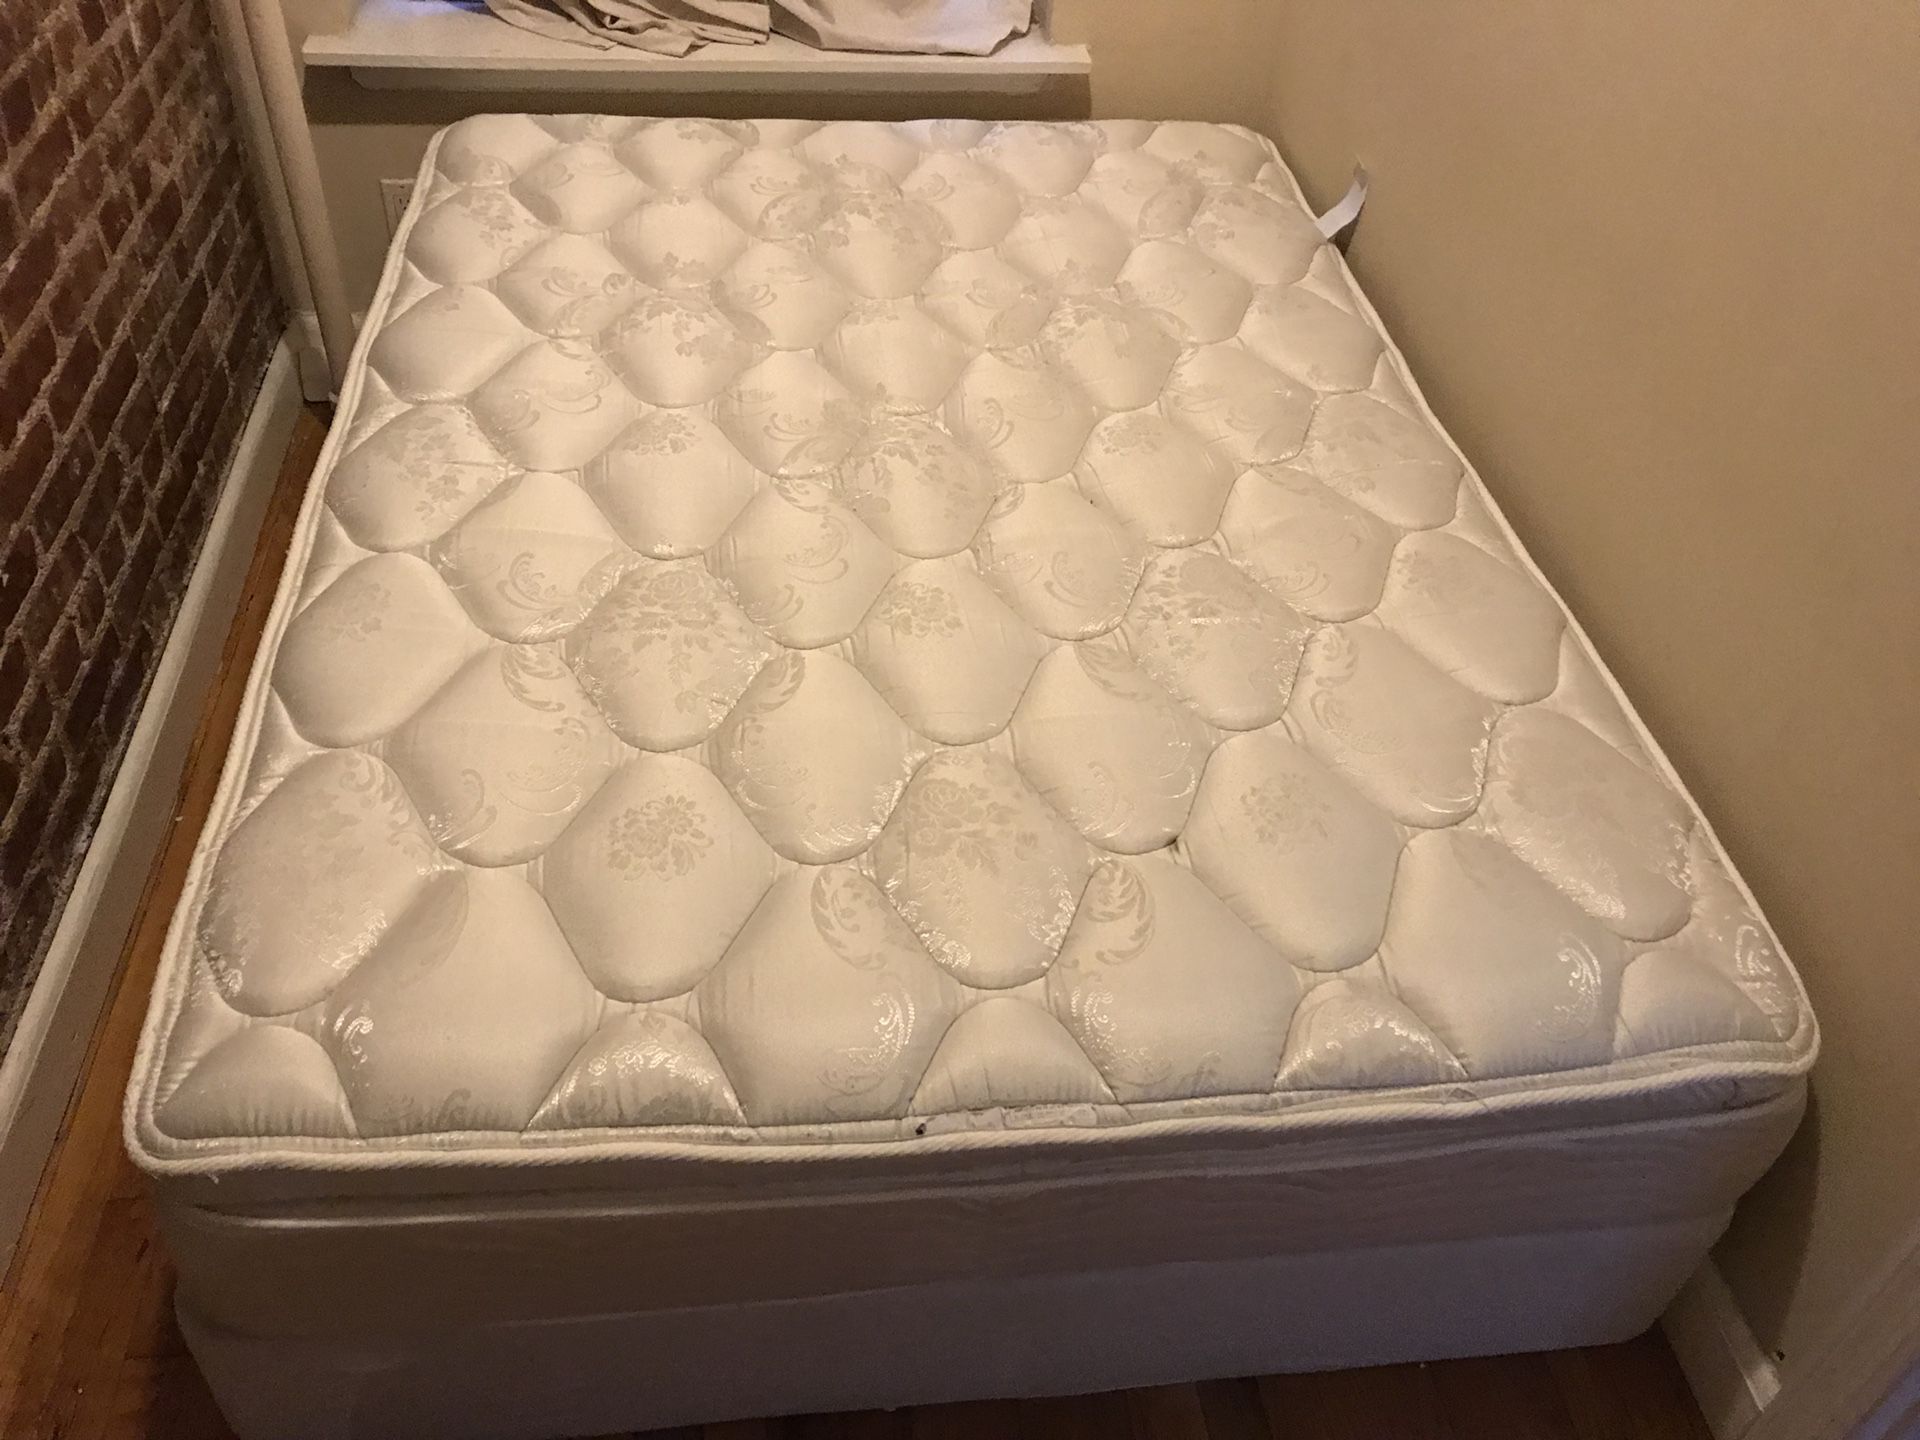 Barely used full size mattress and box springs